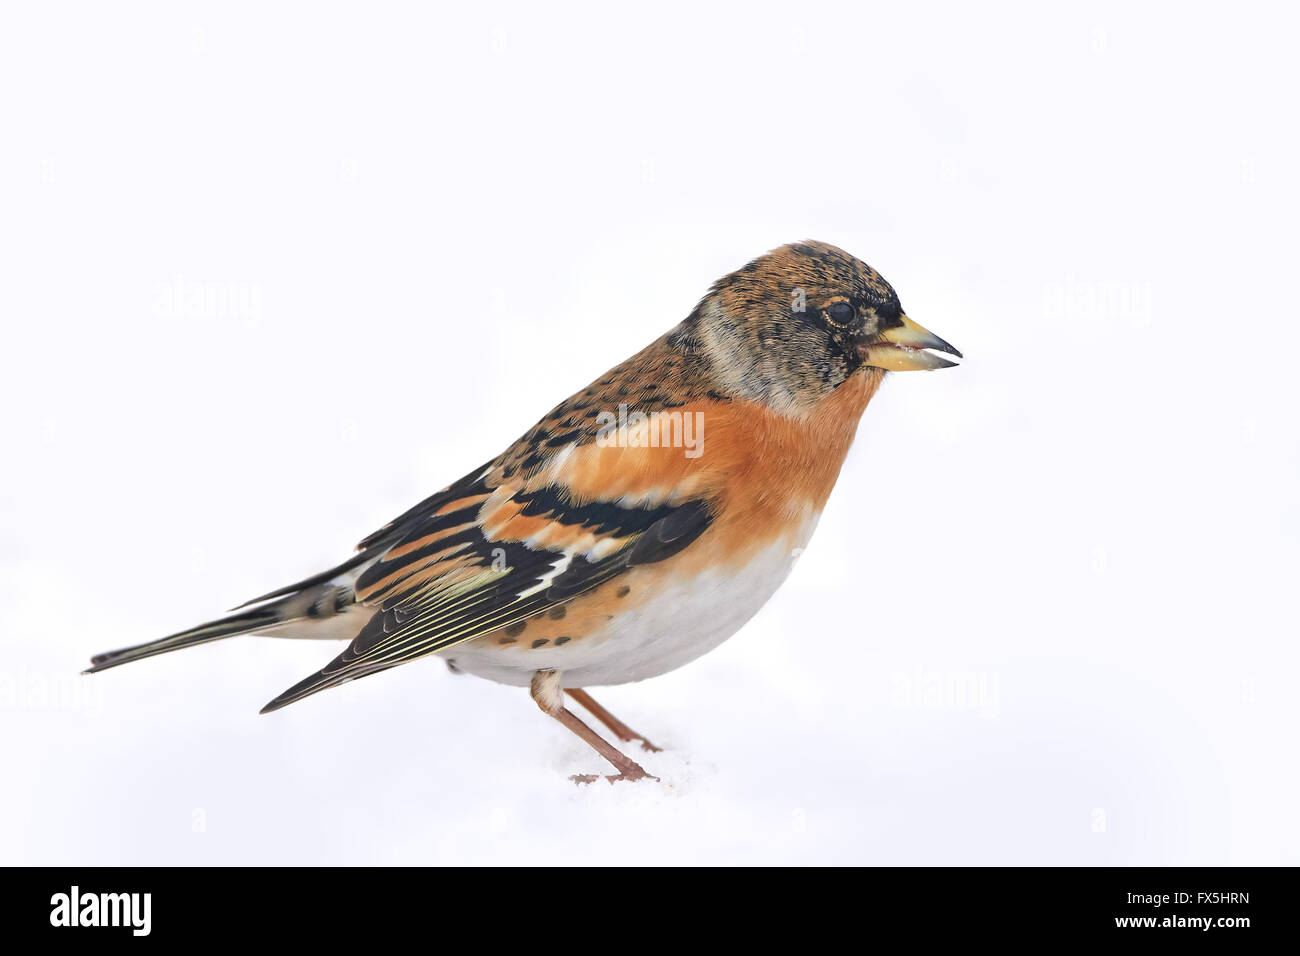 Closeup image of the Brambling resting on the ground in snow Stock Photo